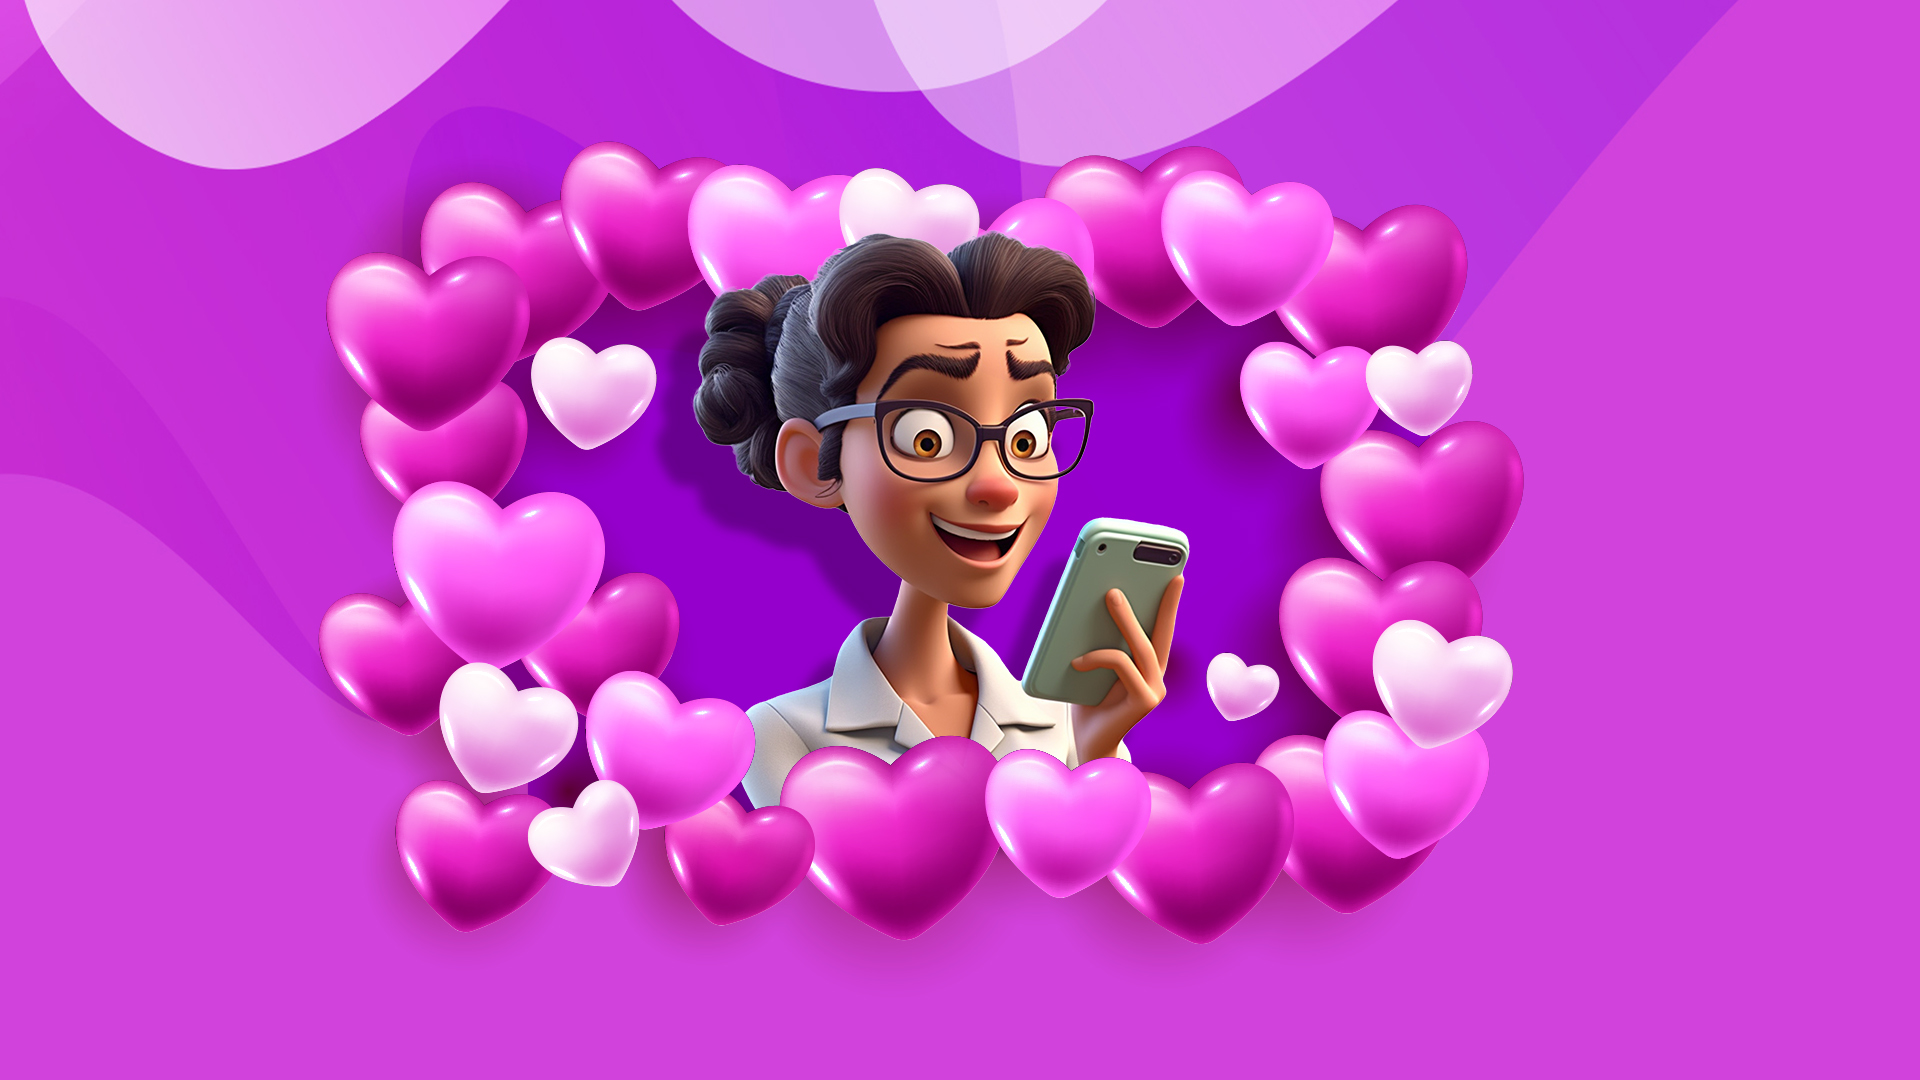 Female animated character looking at mobile phone and smiling surrounded by love hearts on a purple background.